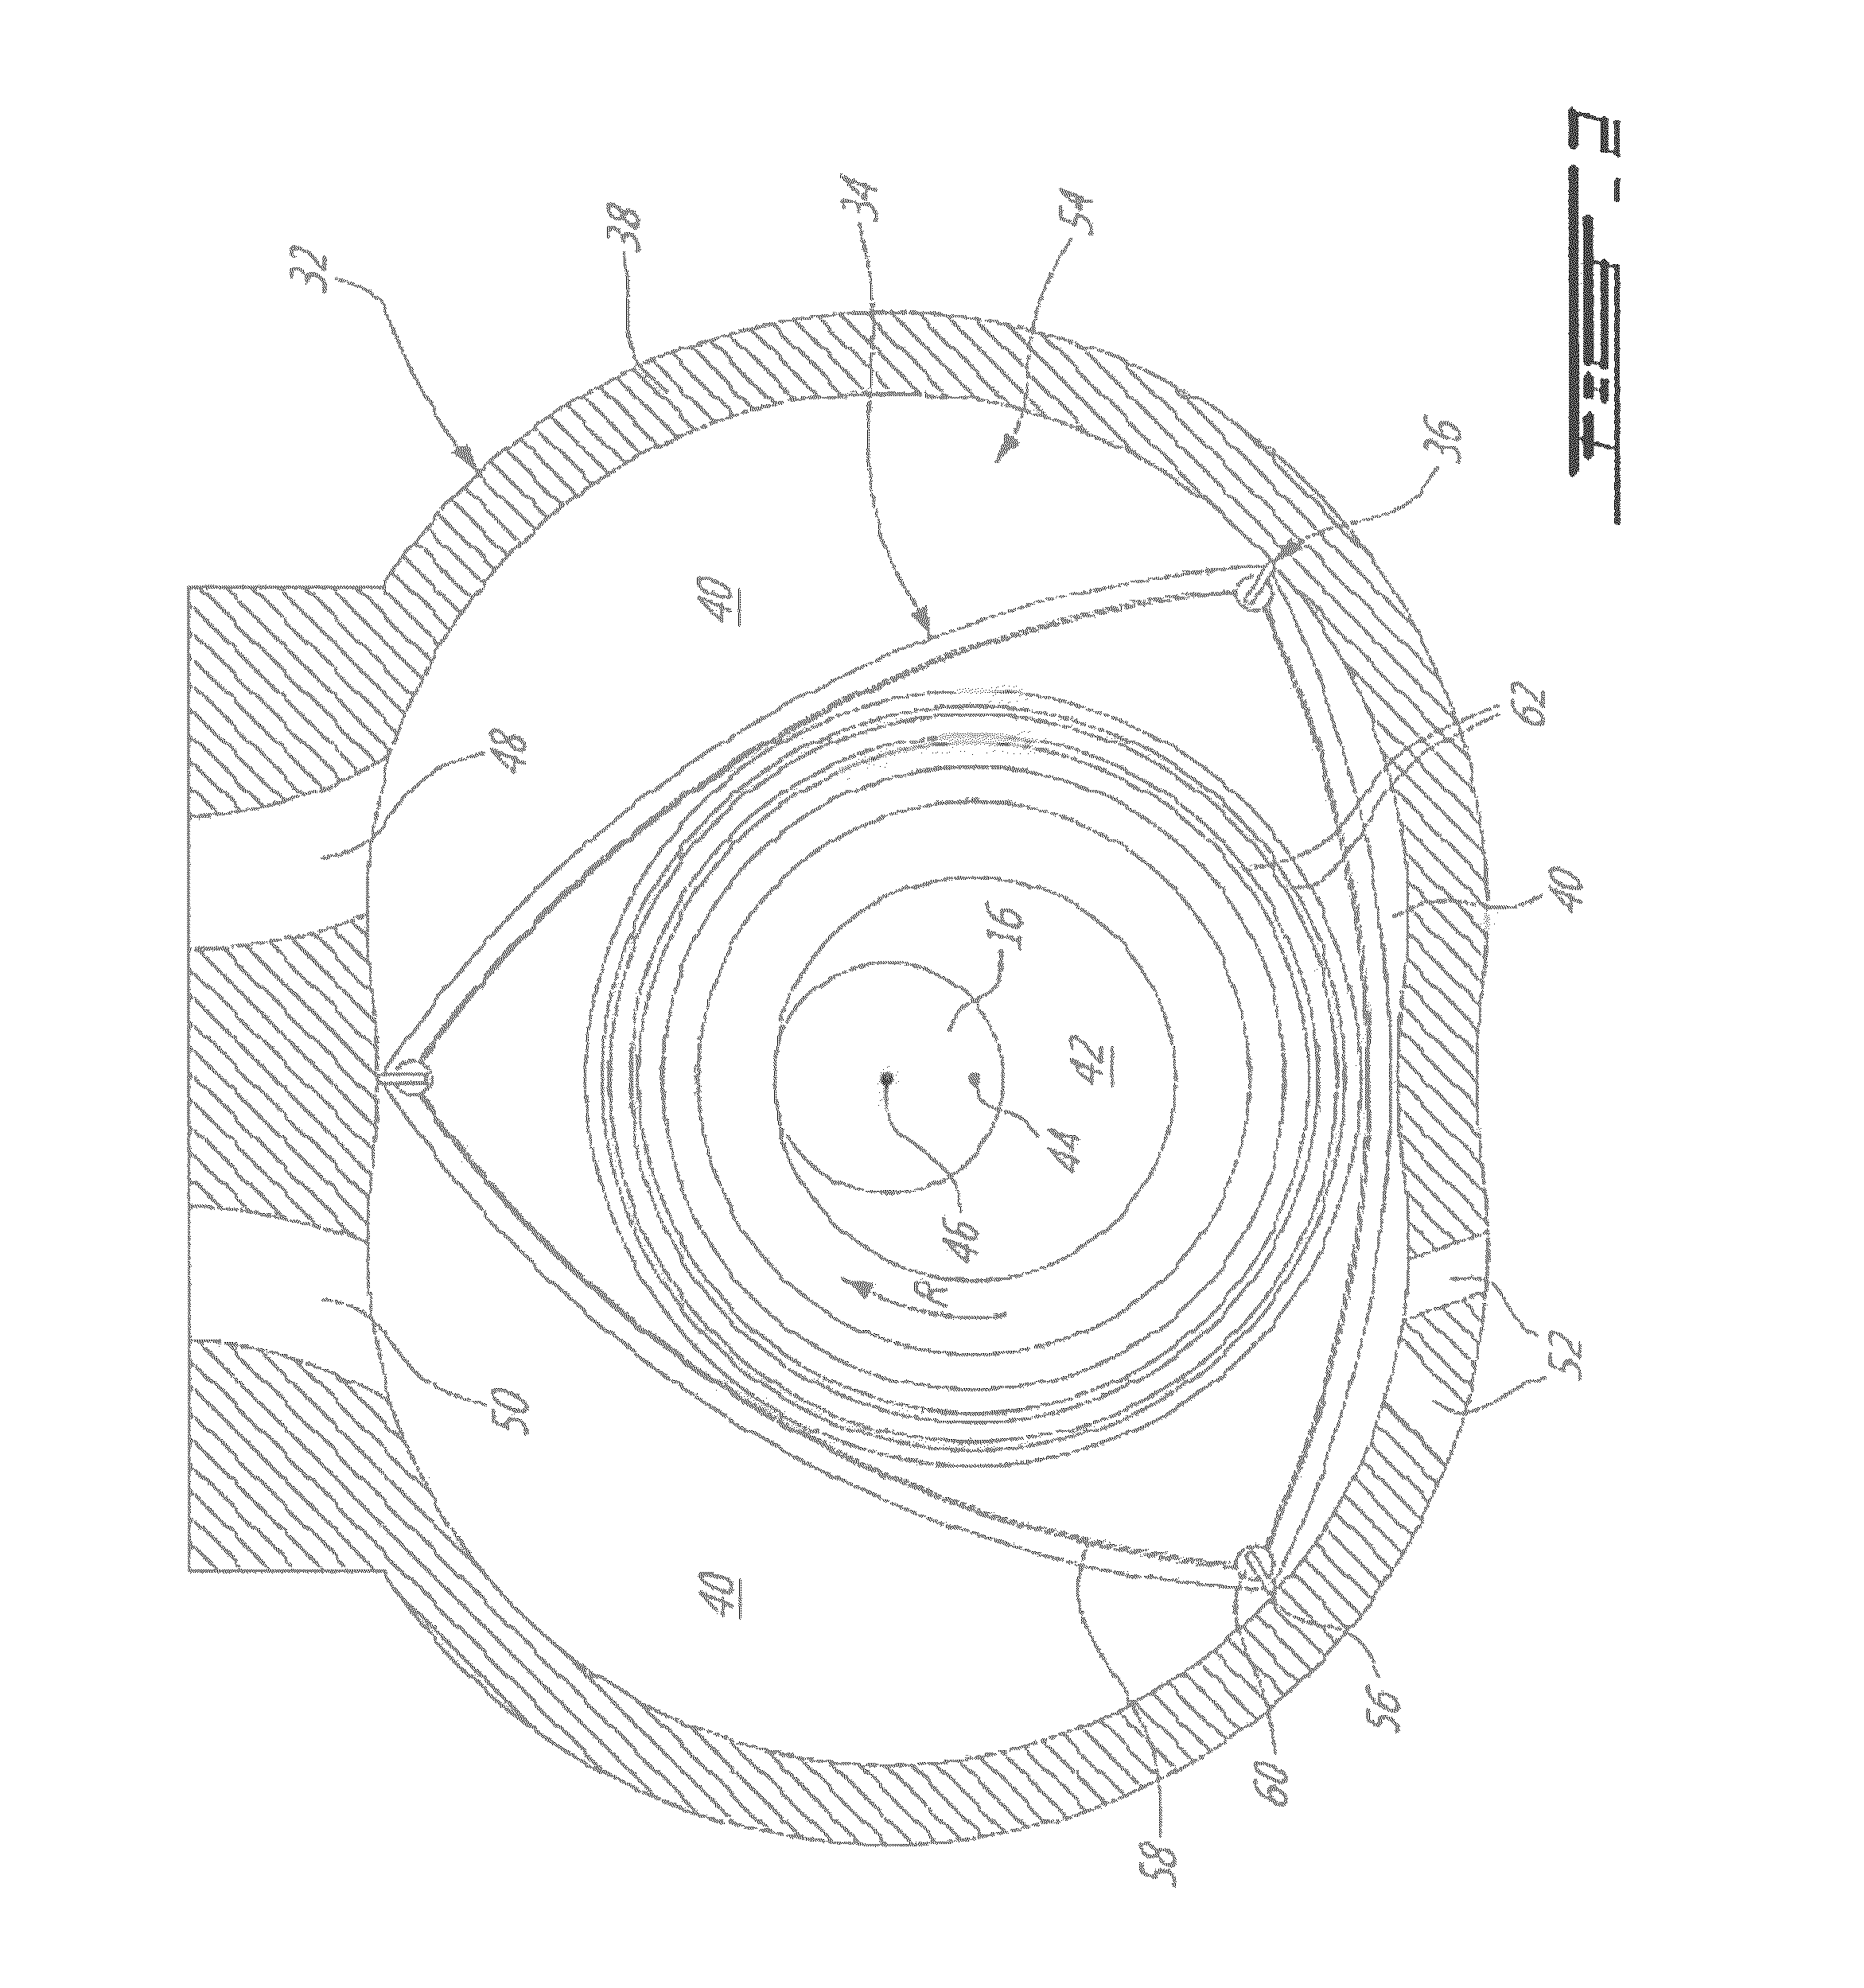 Compound engine assembly with common inlet